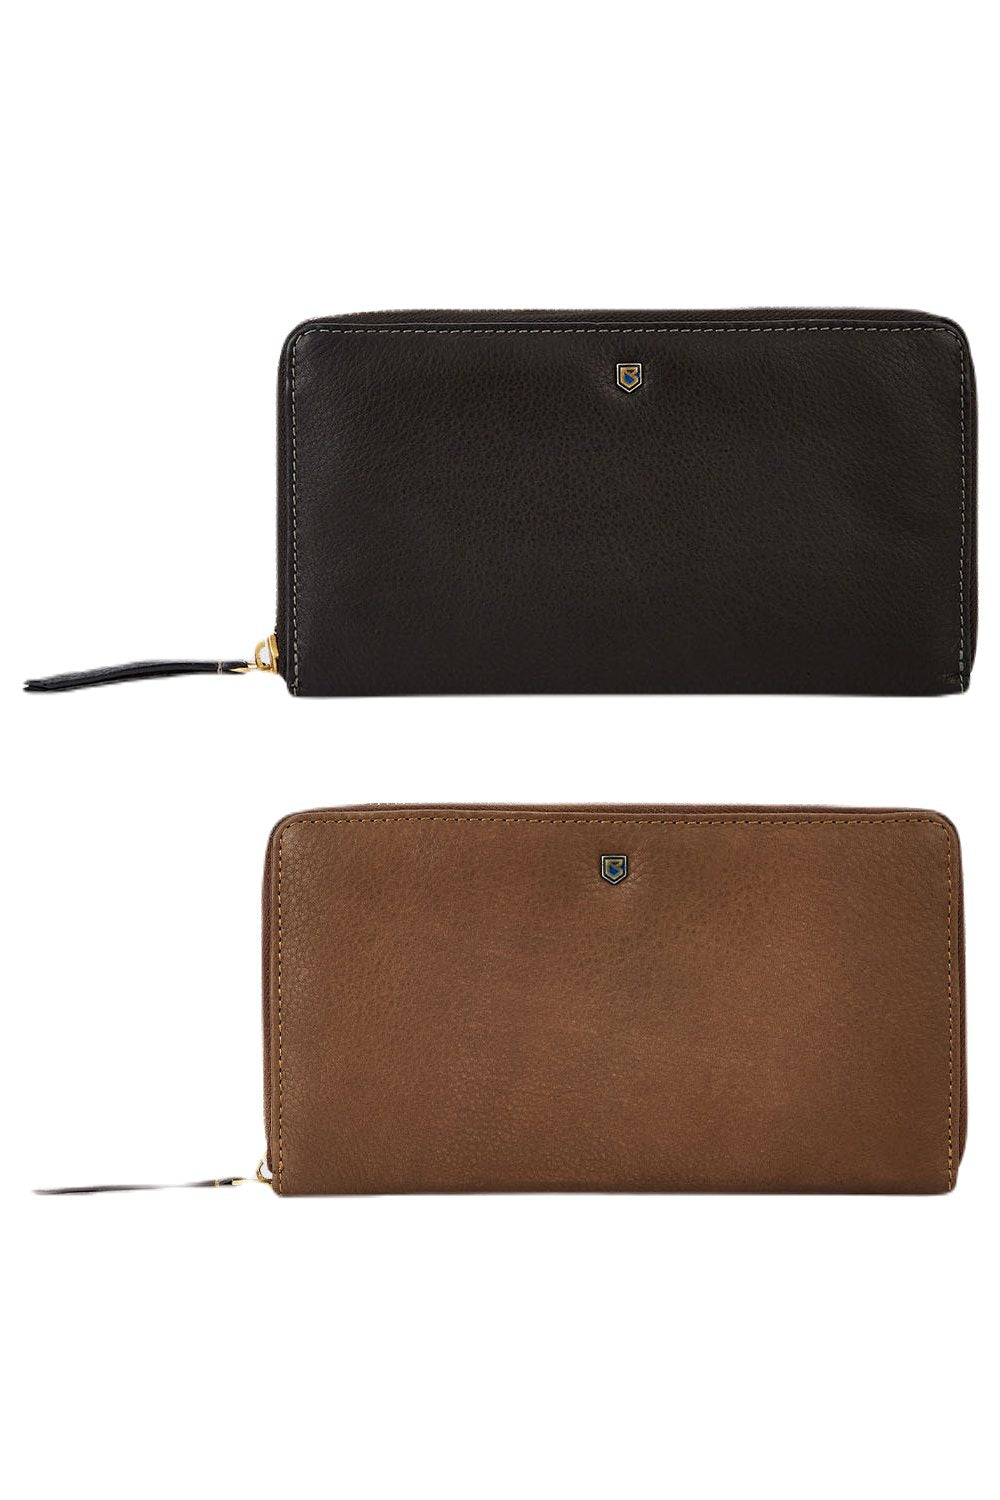 Dubarry Portlick Leather Purse in Black and Walnut 